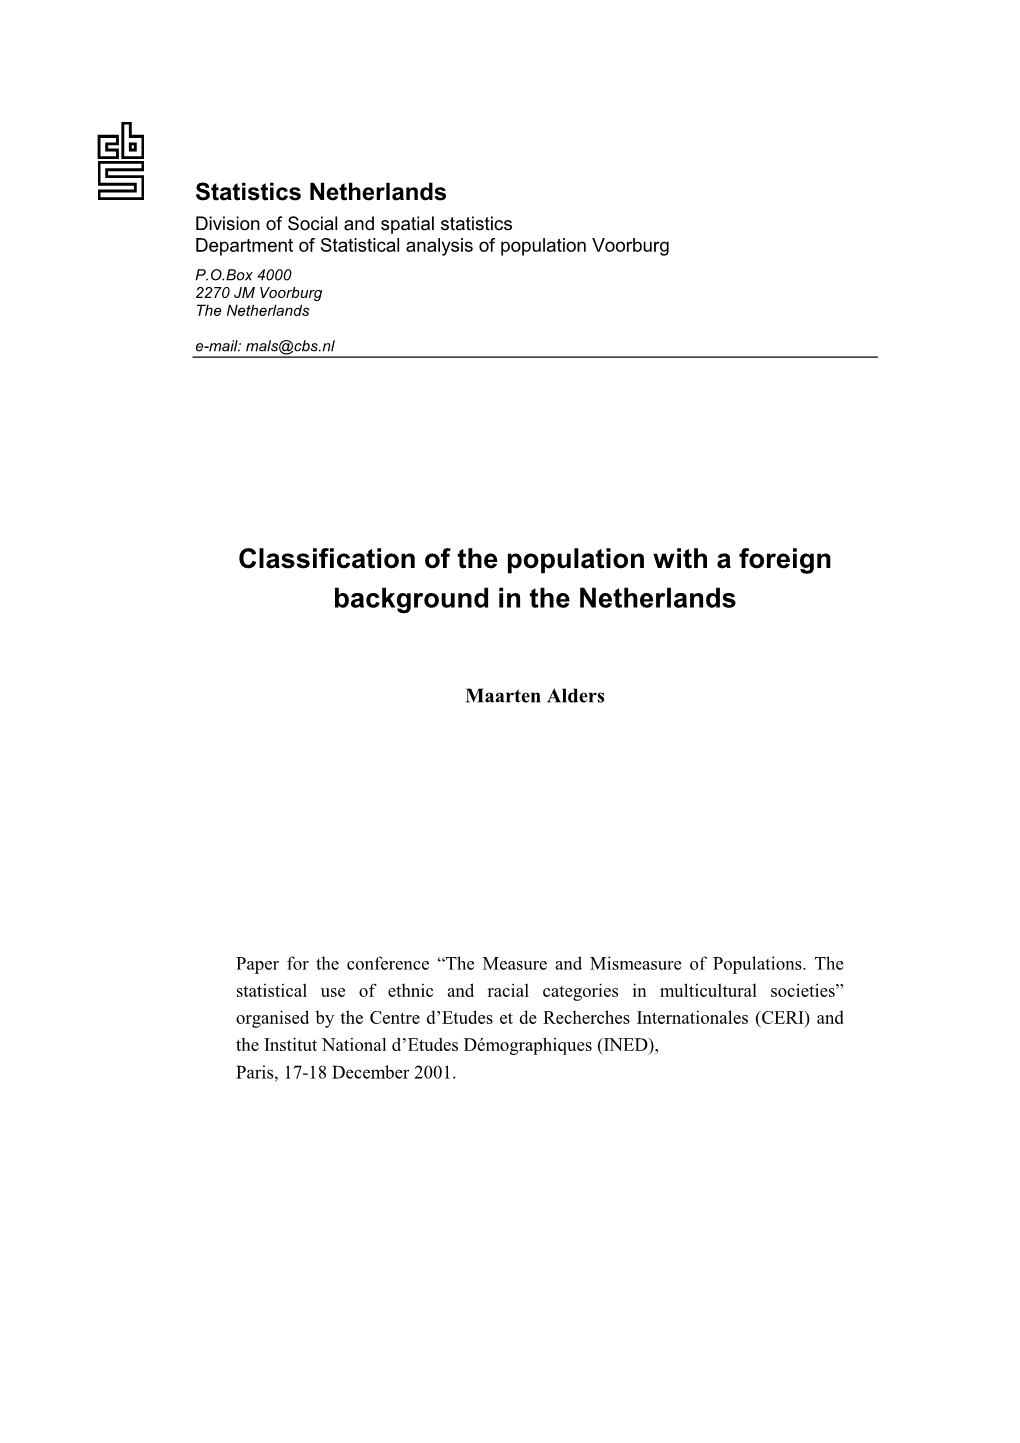 Classification of Population with Foreign Background